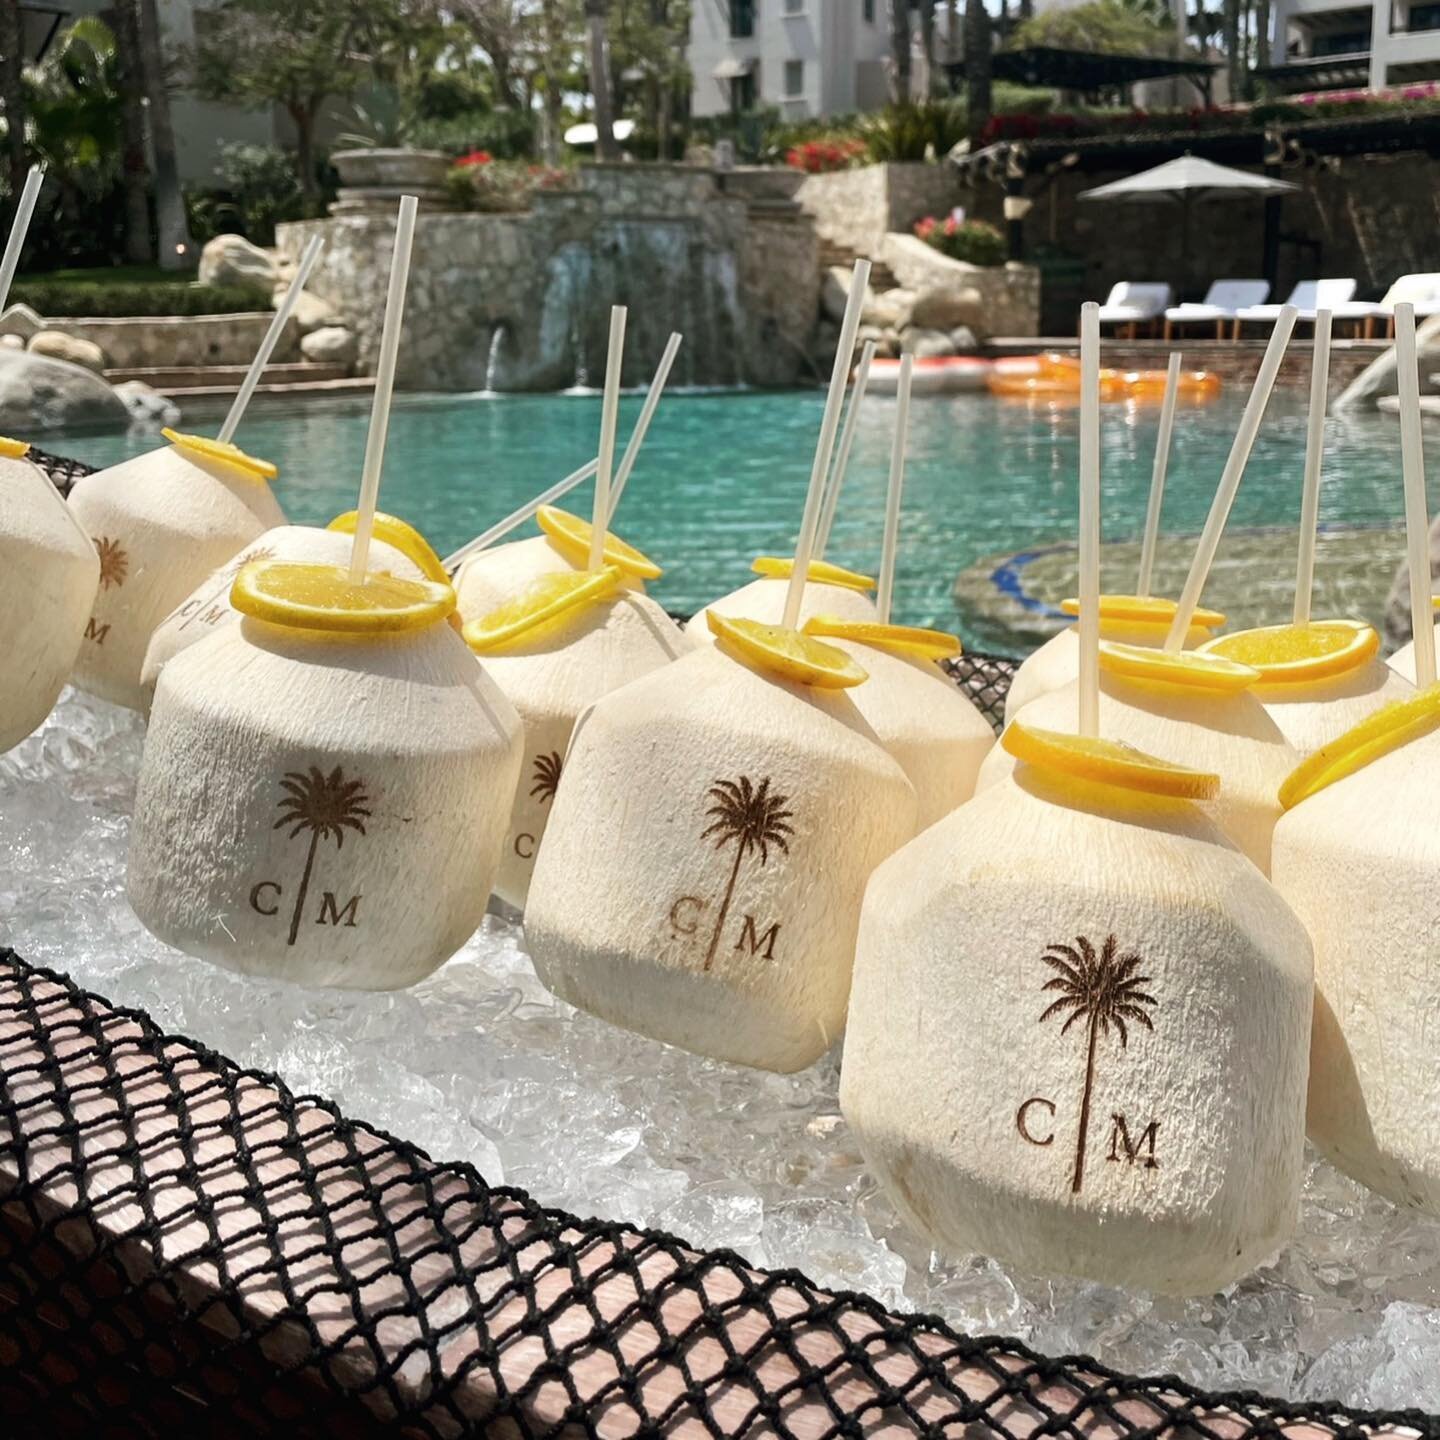 What a way to kick off the weekend festivities! Courtney and Mike had an unforgettable pool party with C🌴M as a personal touch. The hats and bags were not only beautiful but practical for guests to enjoy during their stay. #caboweddings #customhats 